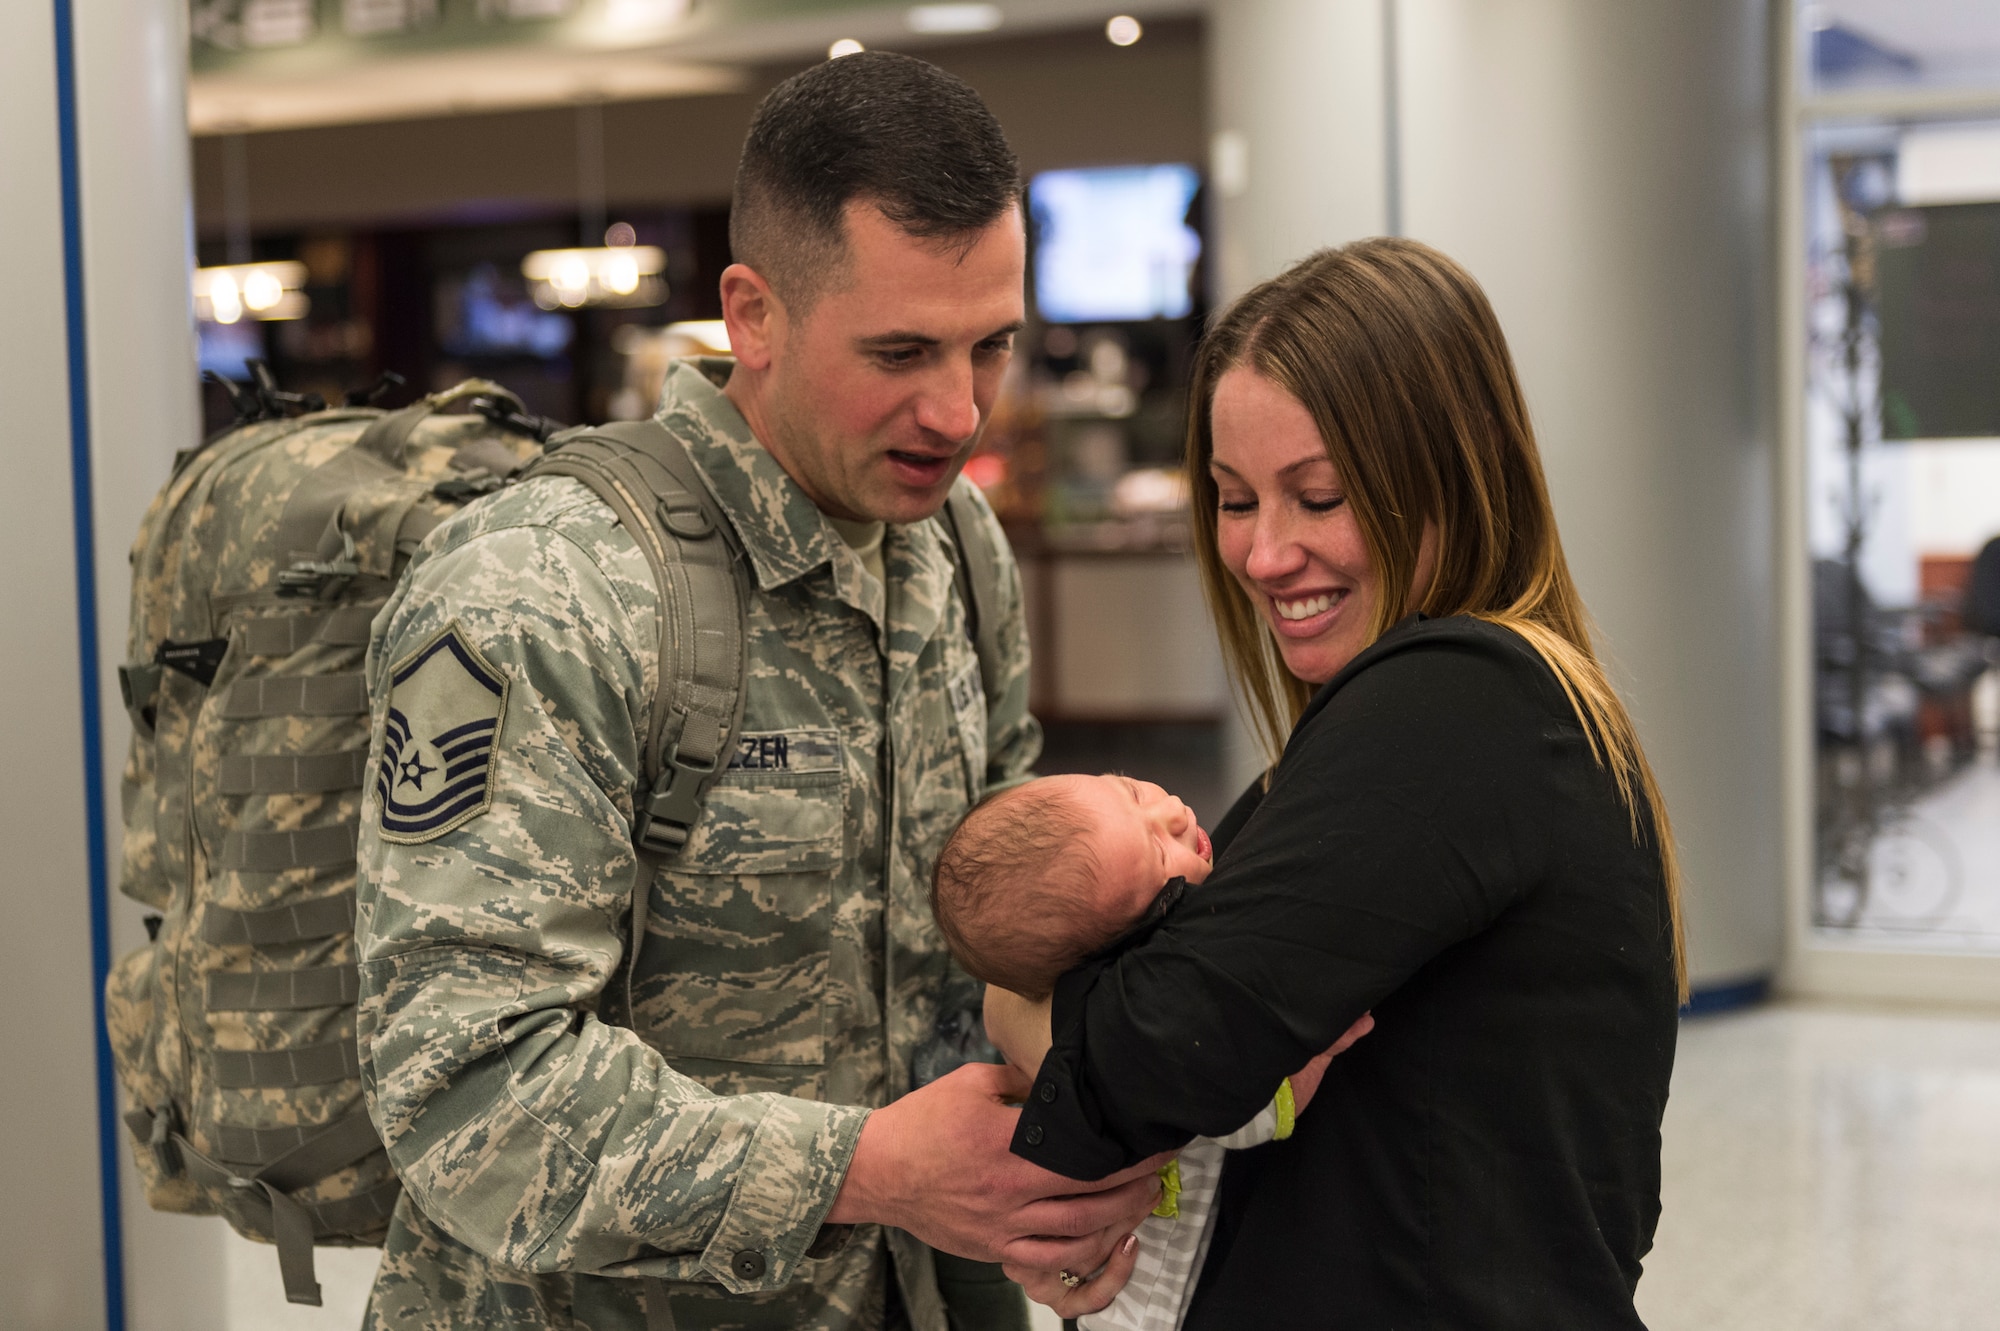 Master Sgt. Joseph Molzen, an Airman assigned to the 107th Security Forces Squadron, Niagara Falls Air Reserve Station, N.Y., gets to see his newborn daughter for the first time. Molzen was one of more than 30 Airmen from the 107th SFS to return from a six-month deployment to Southwest Asia, Feb. 4-5, 2016. (U.S. Air National Guard photo by Staff Sgt. Ryan Campbell/Released)